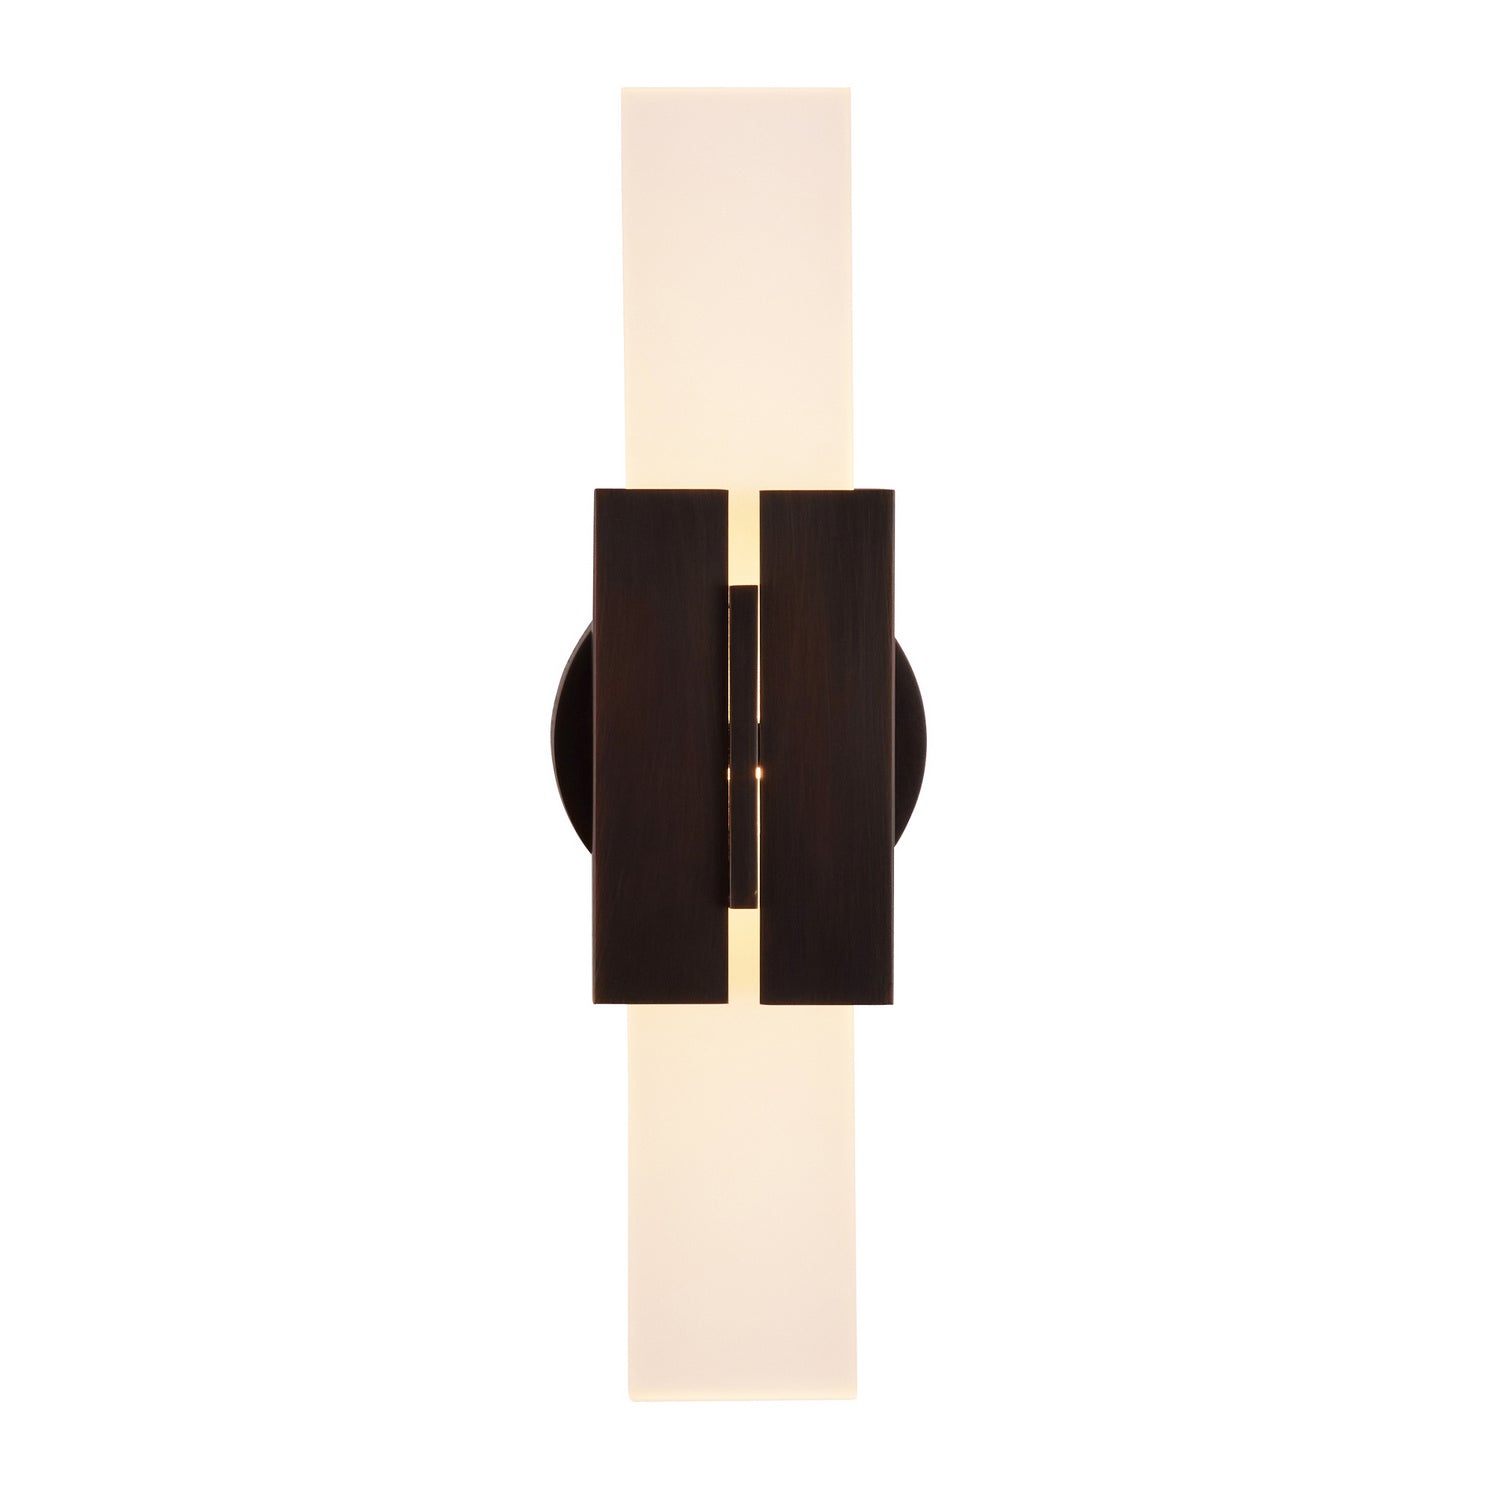 LED Wall Sconce from the Monroe collection in English Bronze finish